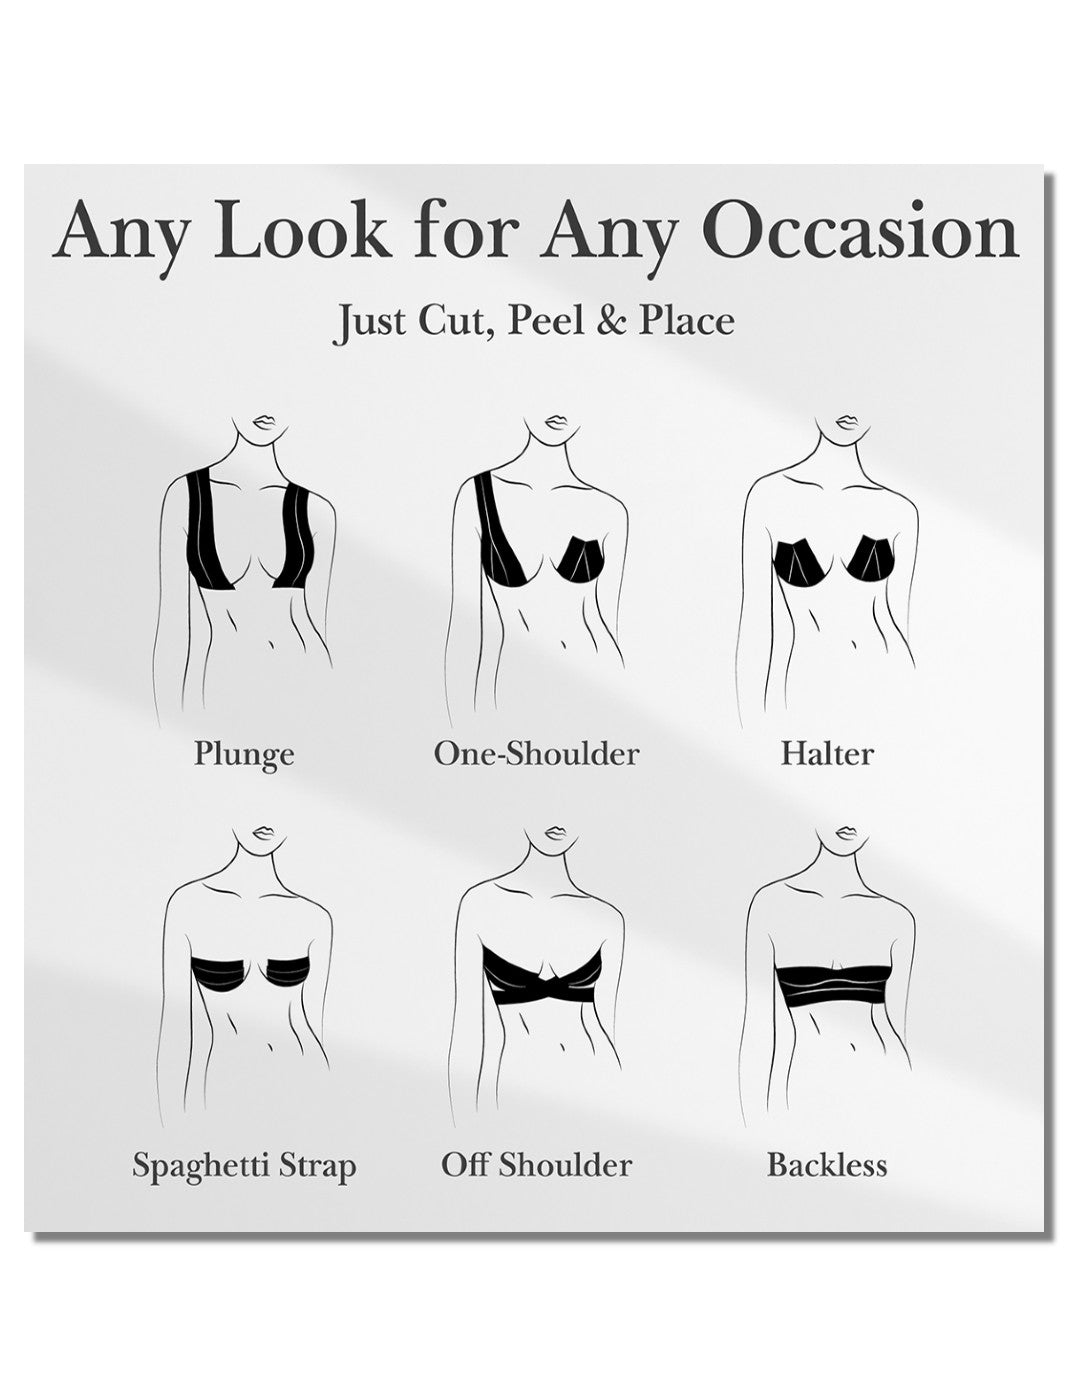 How to Use Boob Tape under Different Outfits